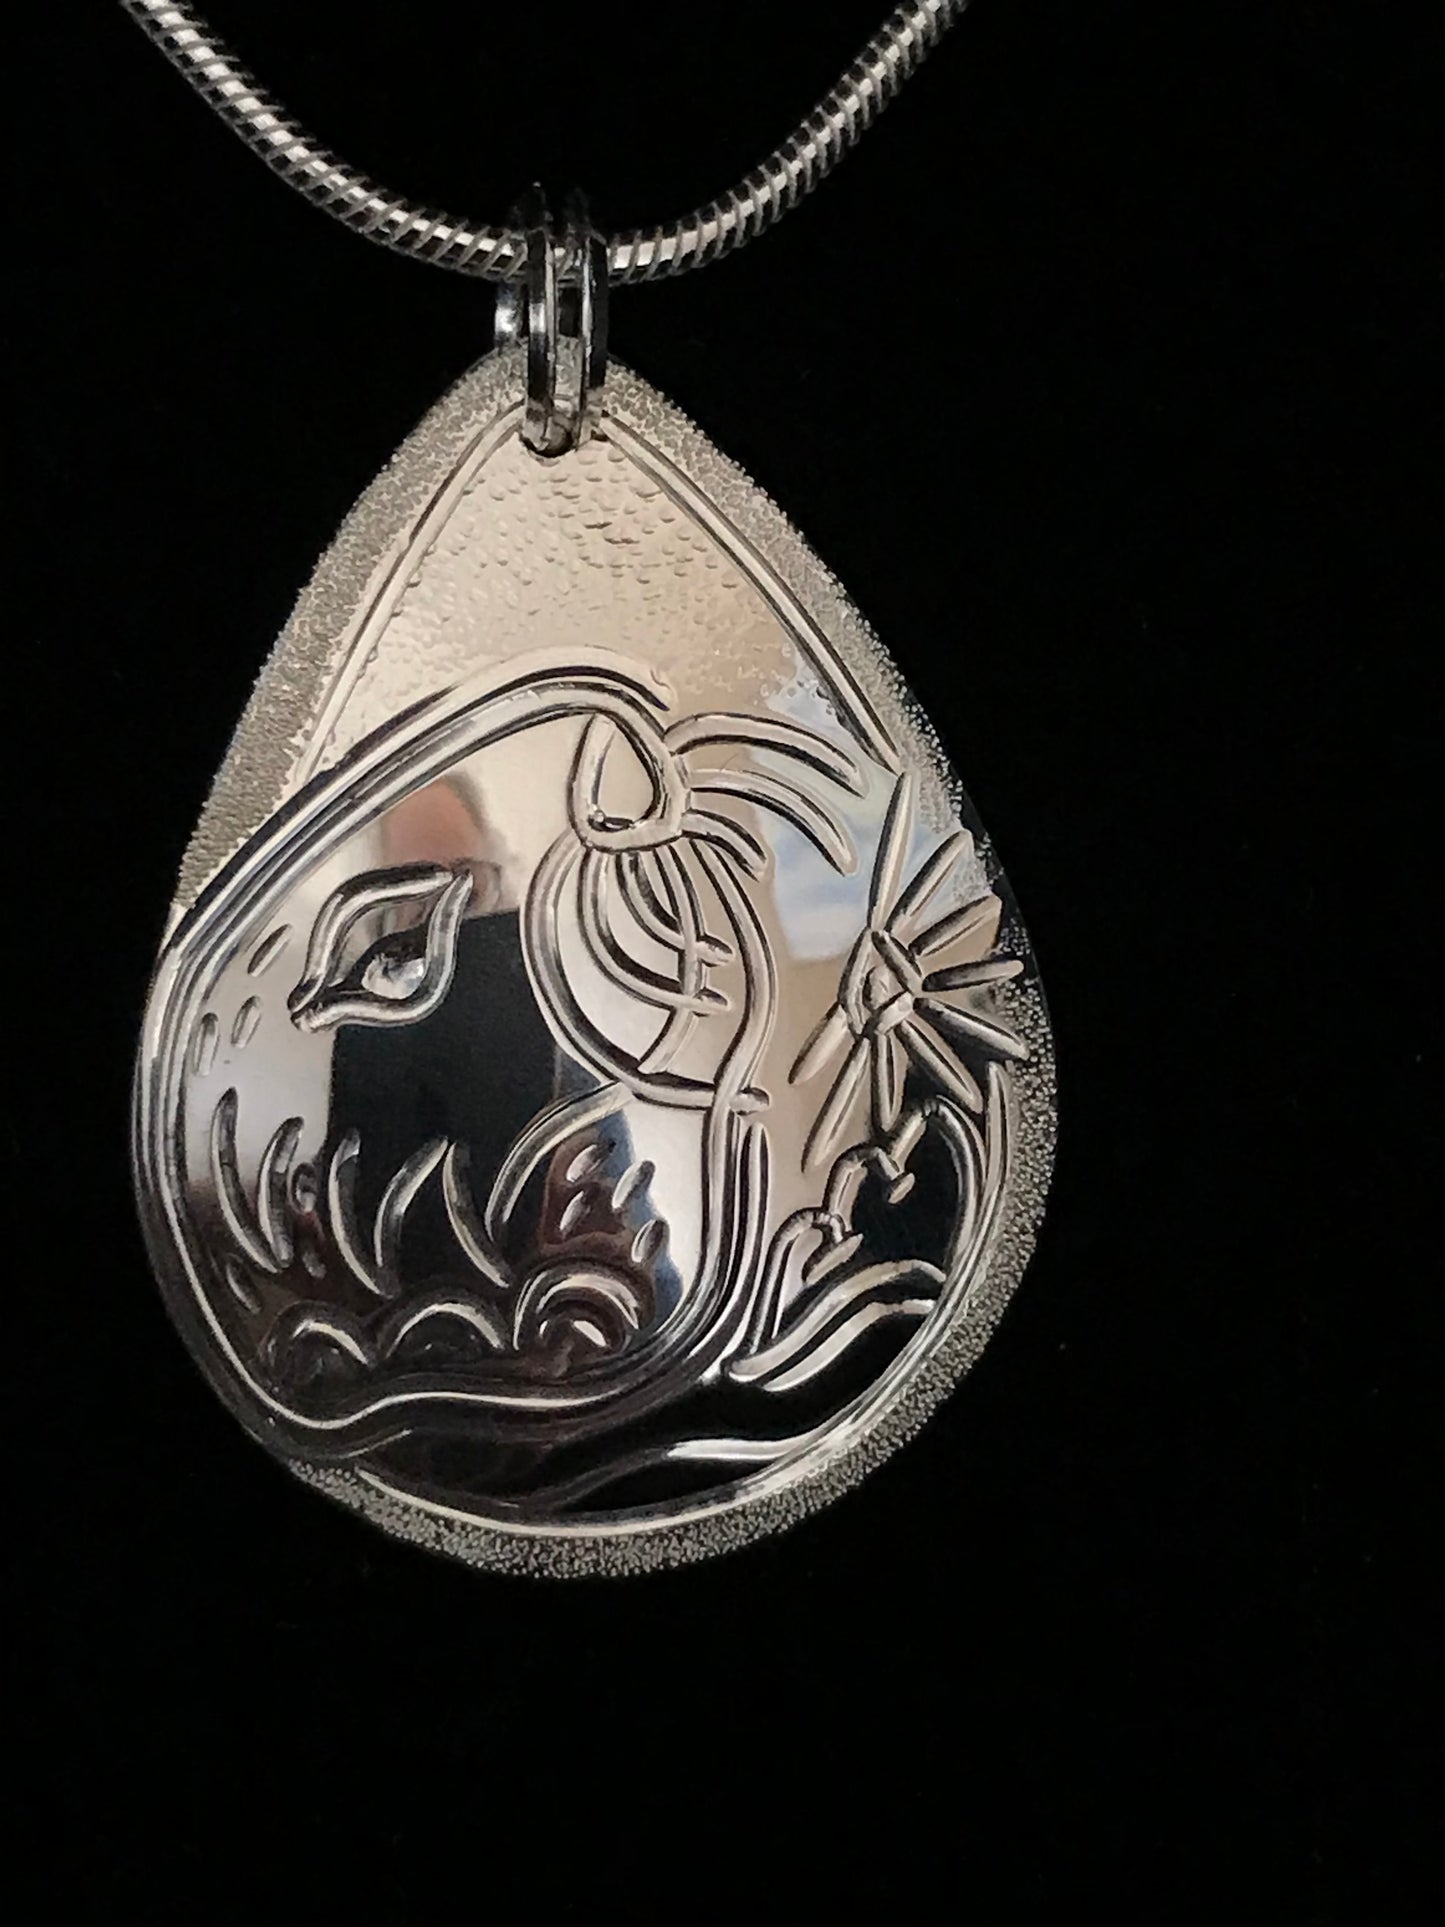 Sea Otter & Urchin sterling silver drop pendant designed and engraved by Laura Dutheil.